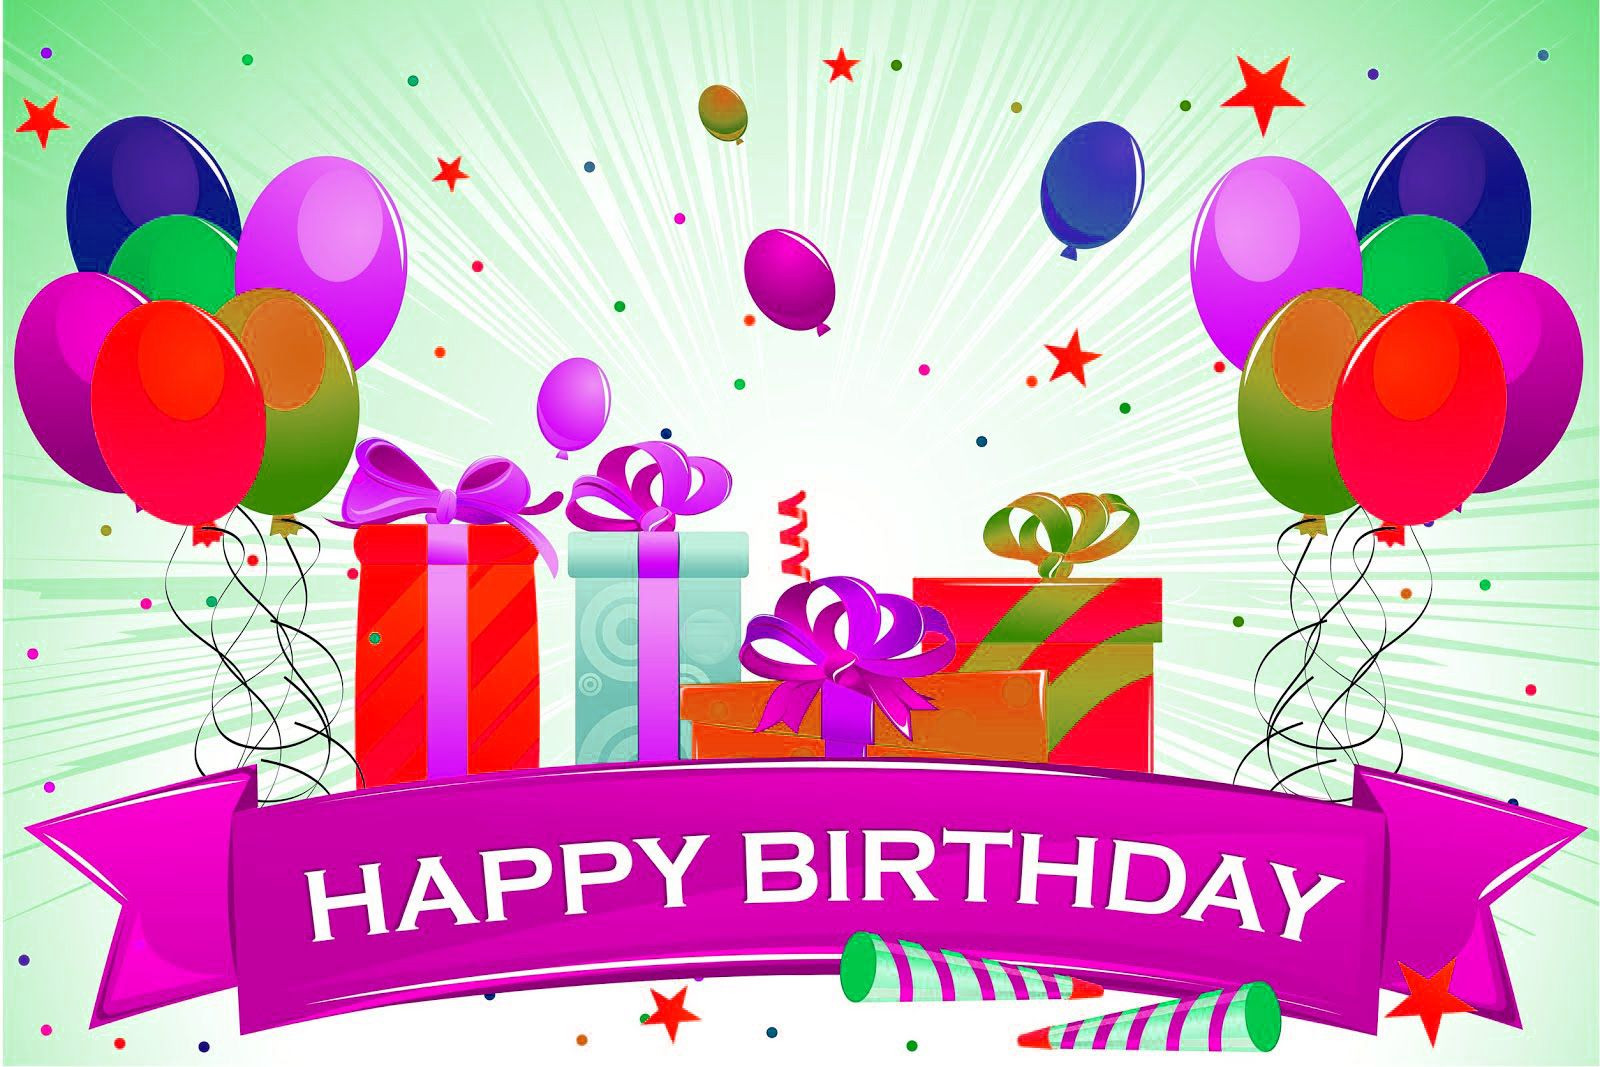 Free Download Birthday Card
 birthday cards online HD Wallpapers Download Free birthday